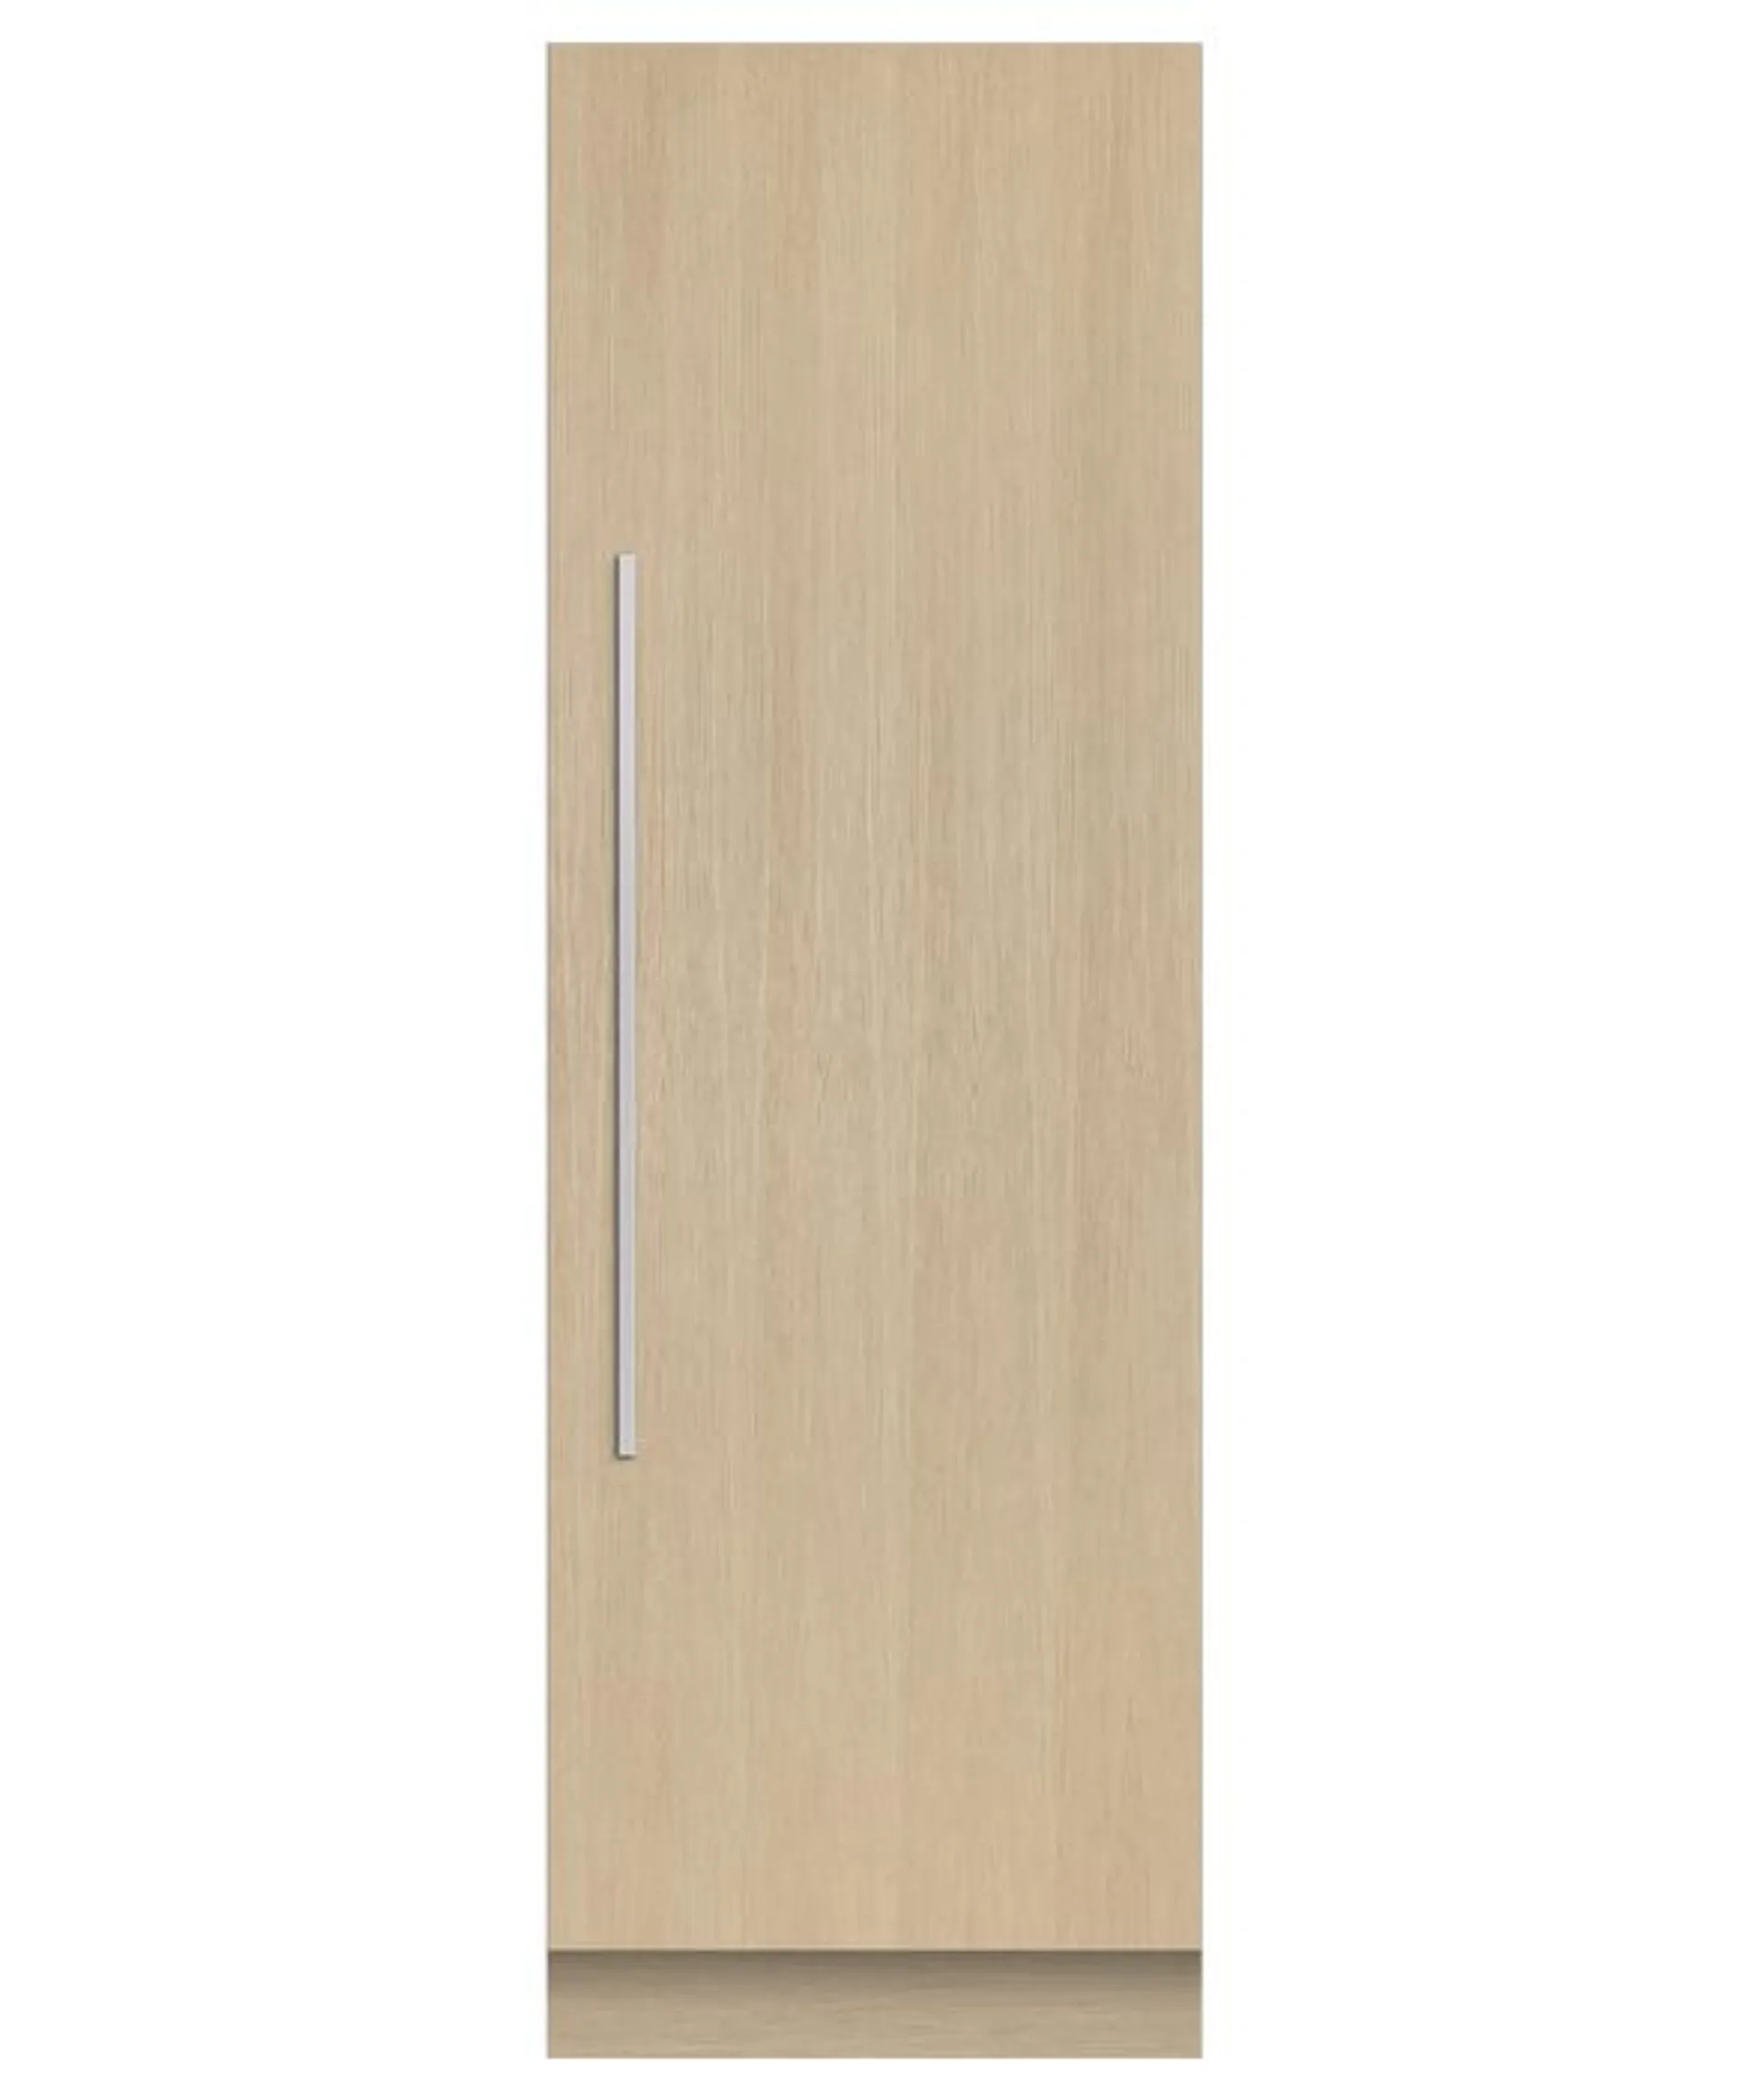 Integrated Triple Zone Refrigerator, 60cm, Water